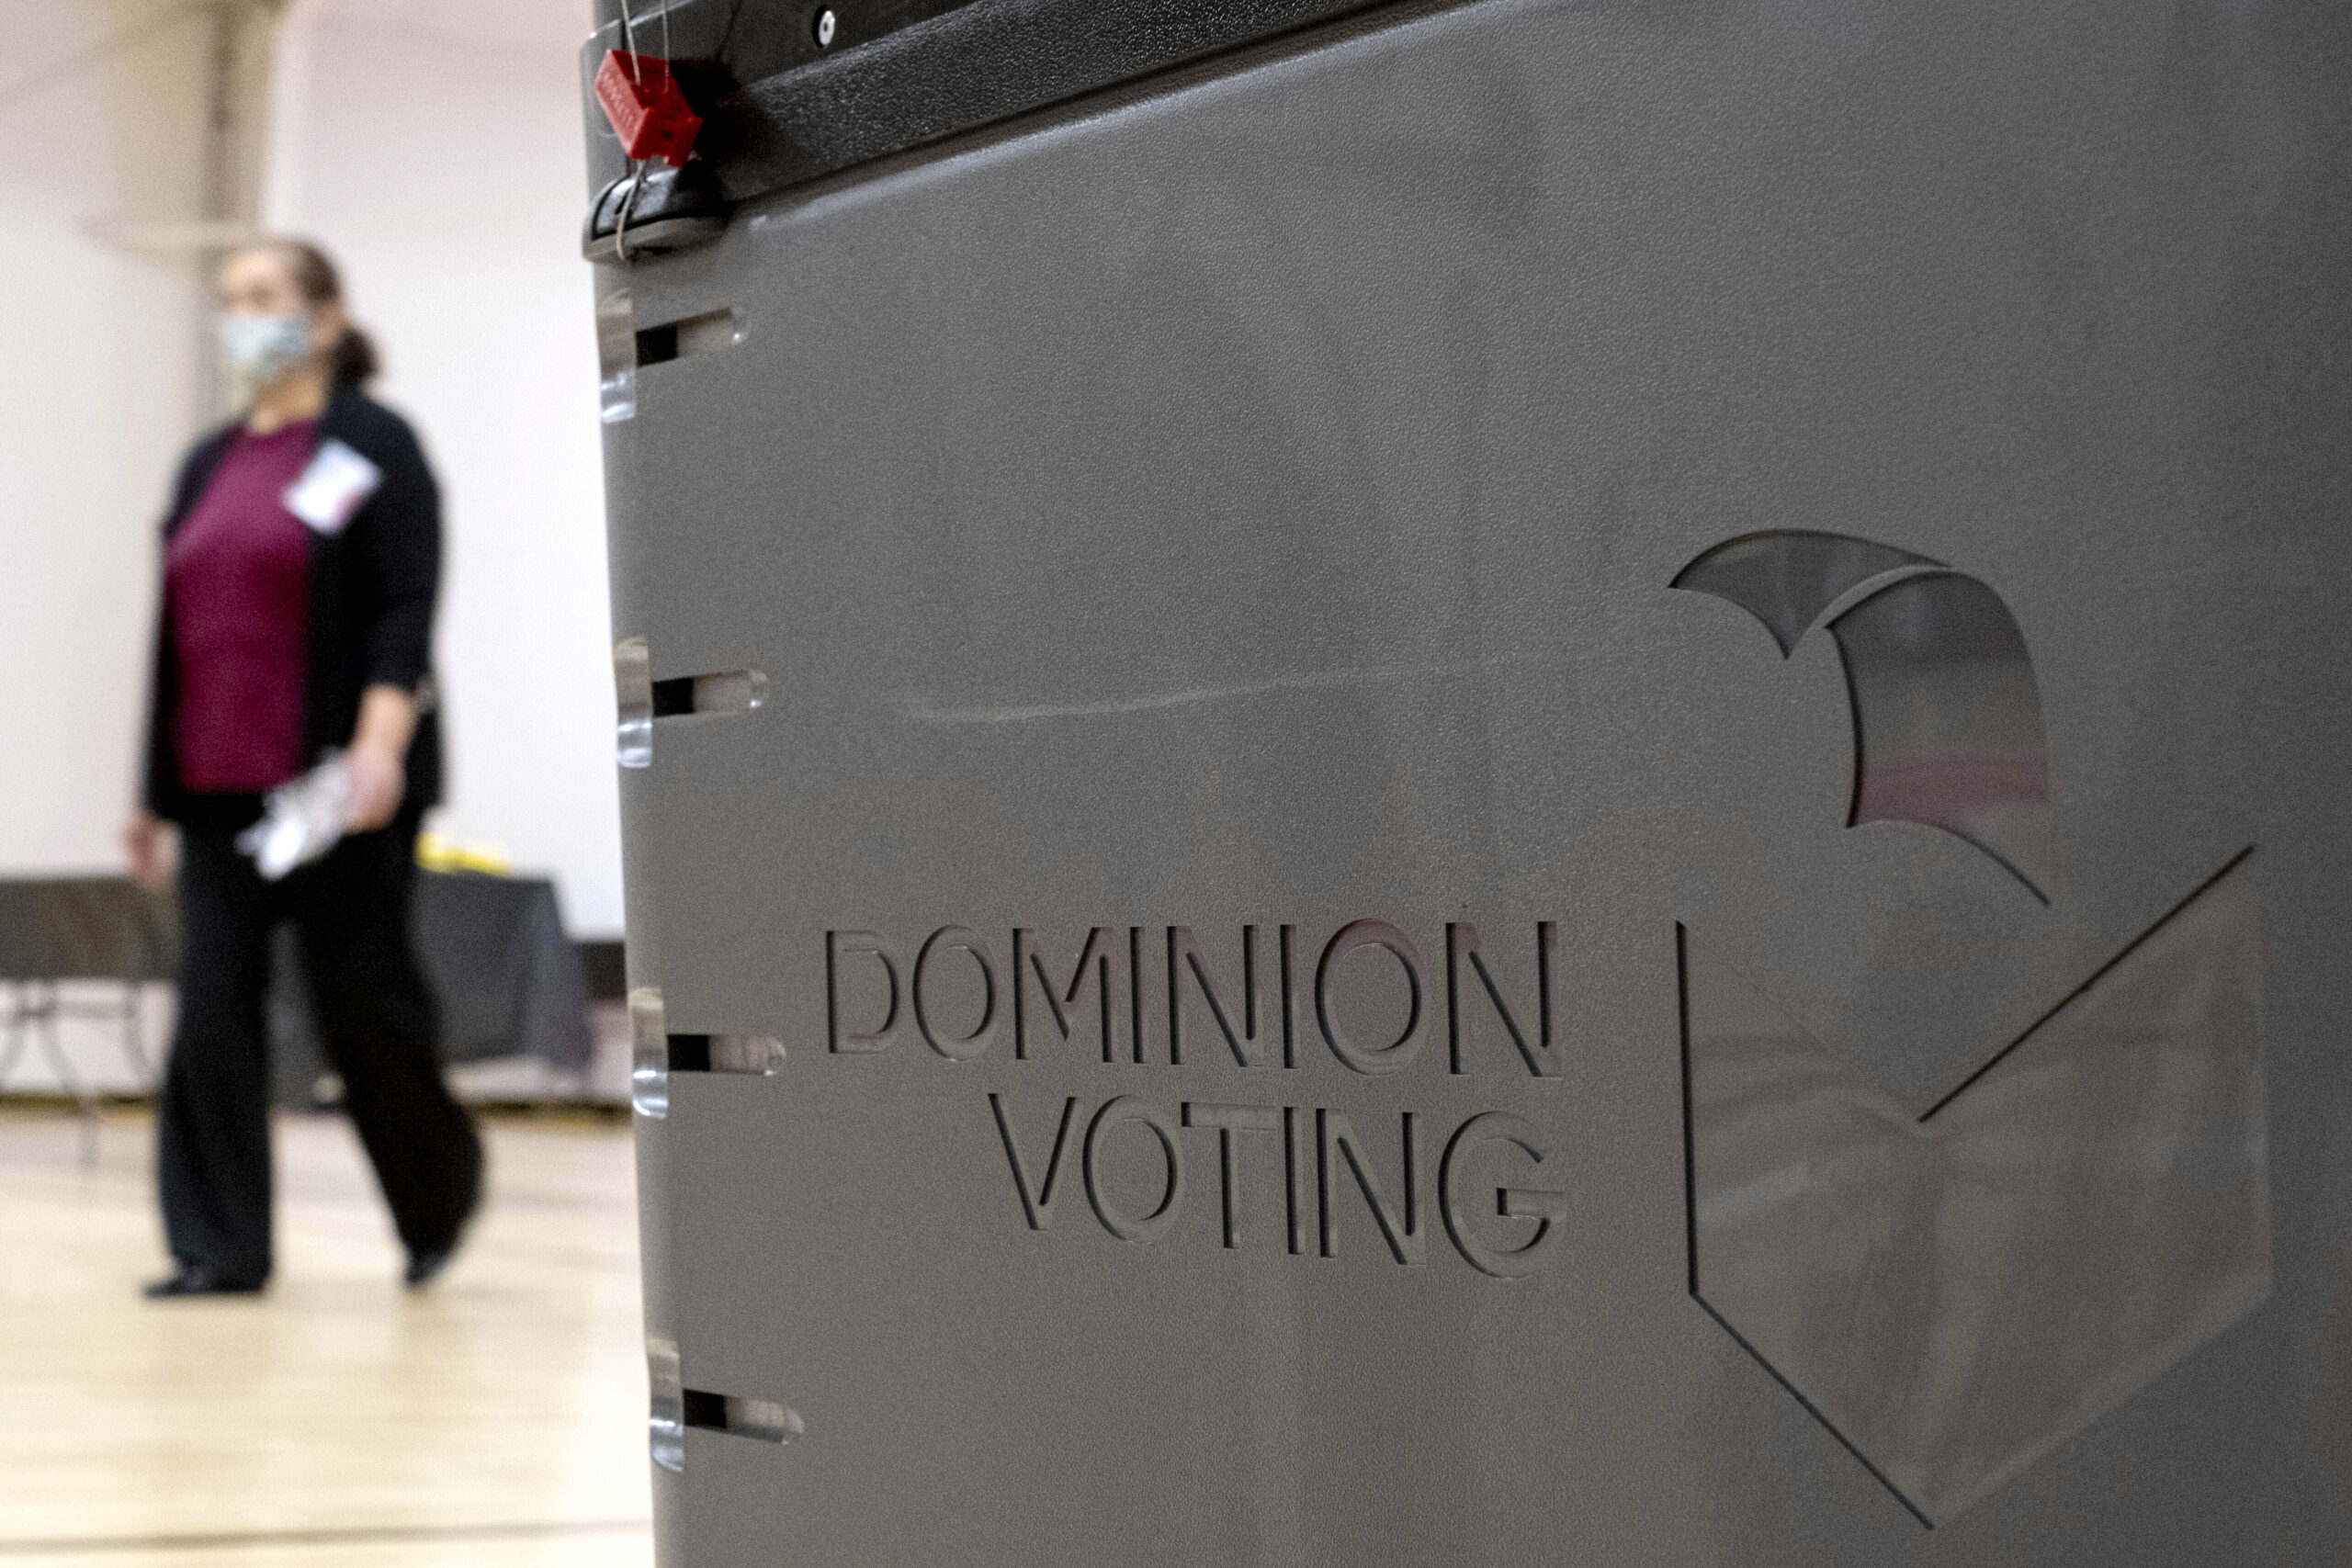 A worker passes a Dominion Voting ballot scanner while setting up a polling location at an elementary school in Gwinnett County, Ga., outside of Atlanta on Jan. 4, 2021. Newsmax has apologized to an employee of Dominion Voting Systems for airing false allegations that he manipulating voting machines or tallies on Election Day to the detriment of former President Donald Trump. Eric Coomer, security director for Dominion, subsequently dropped the conservative news network from a defamation lawsuit. (AP Photo/Ben Gray)